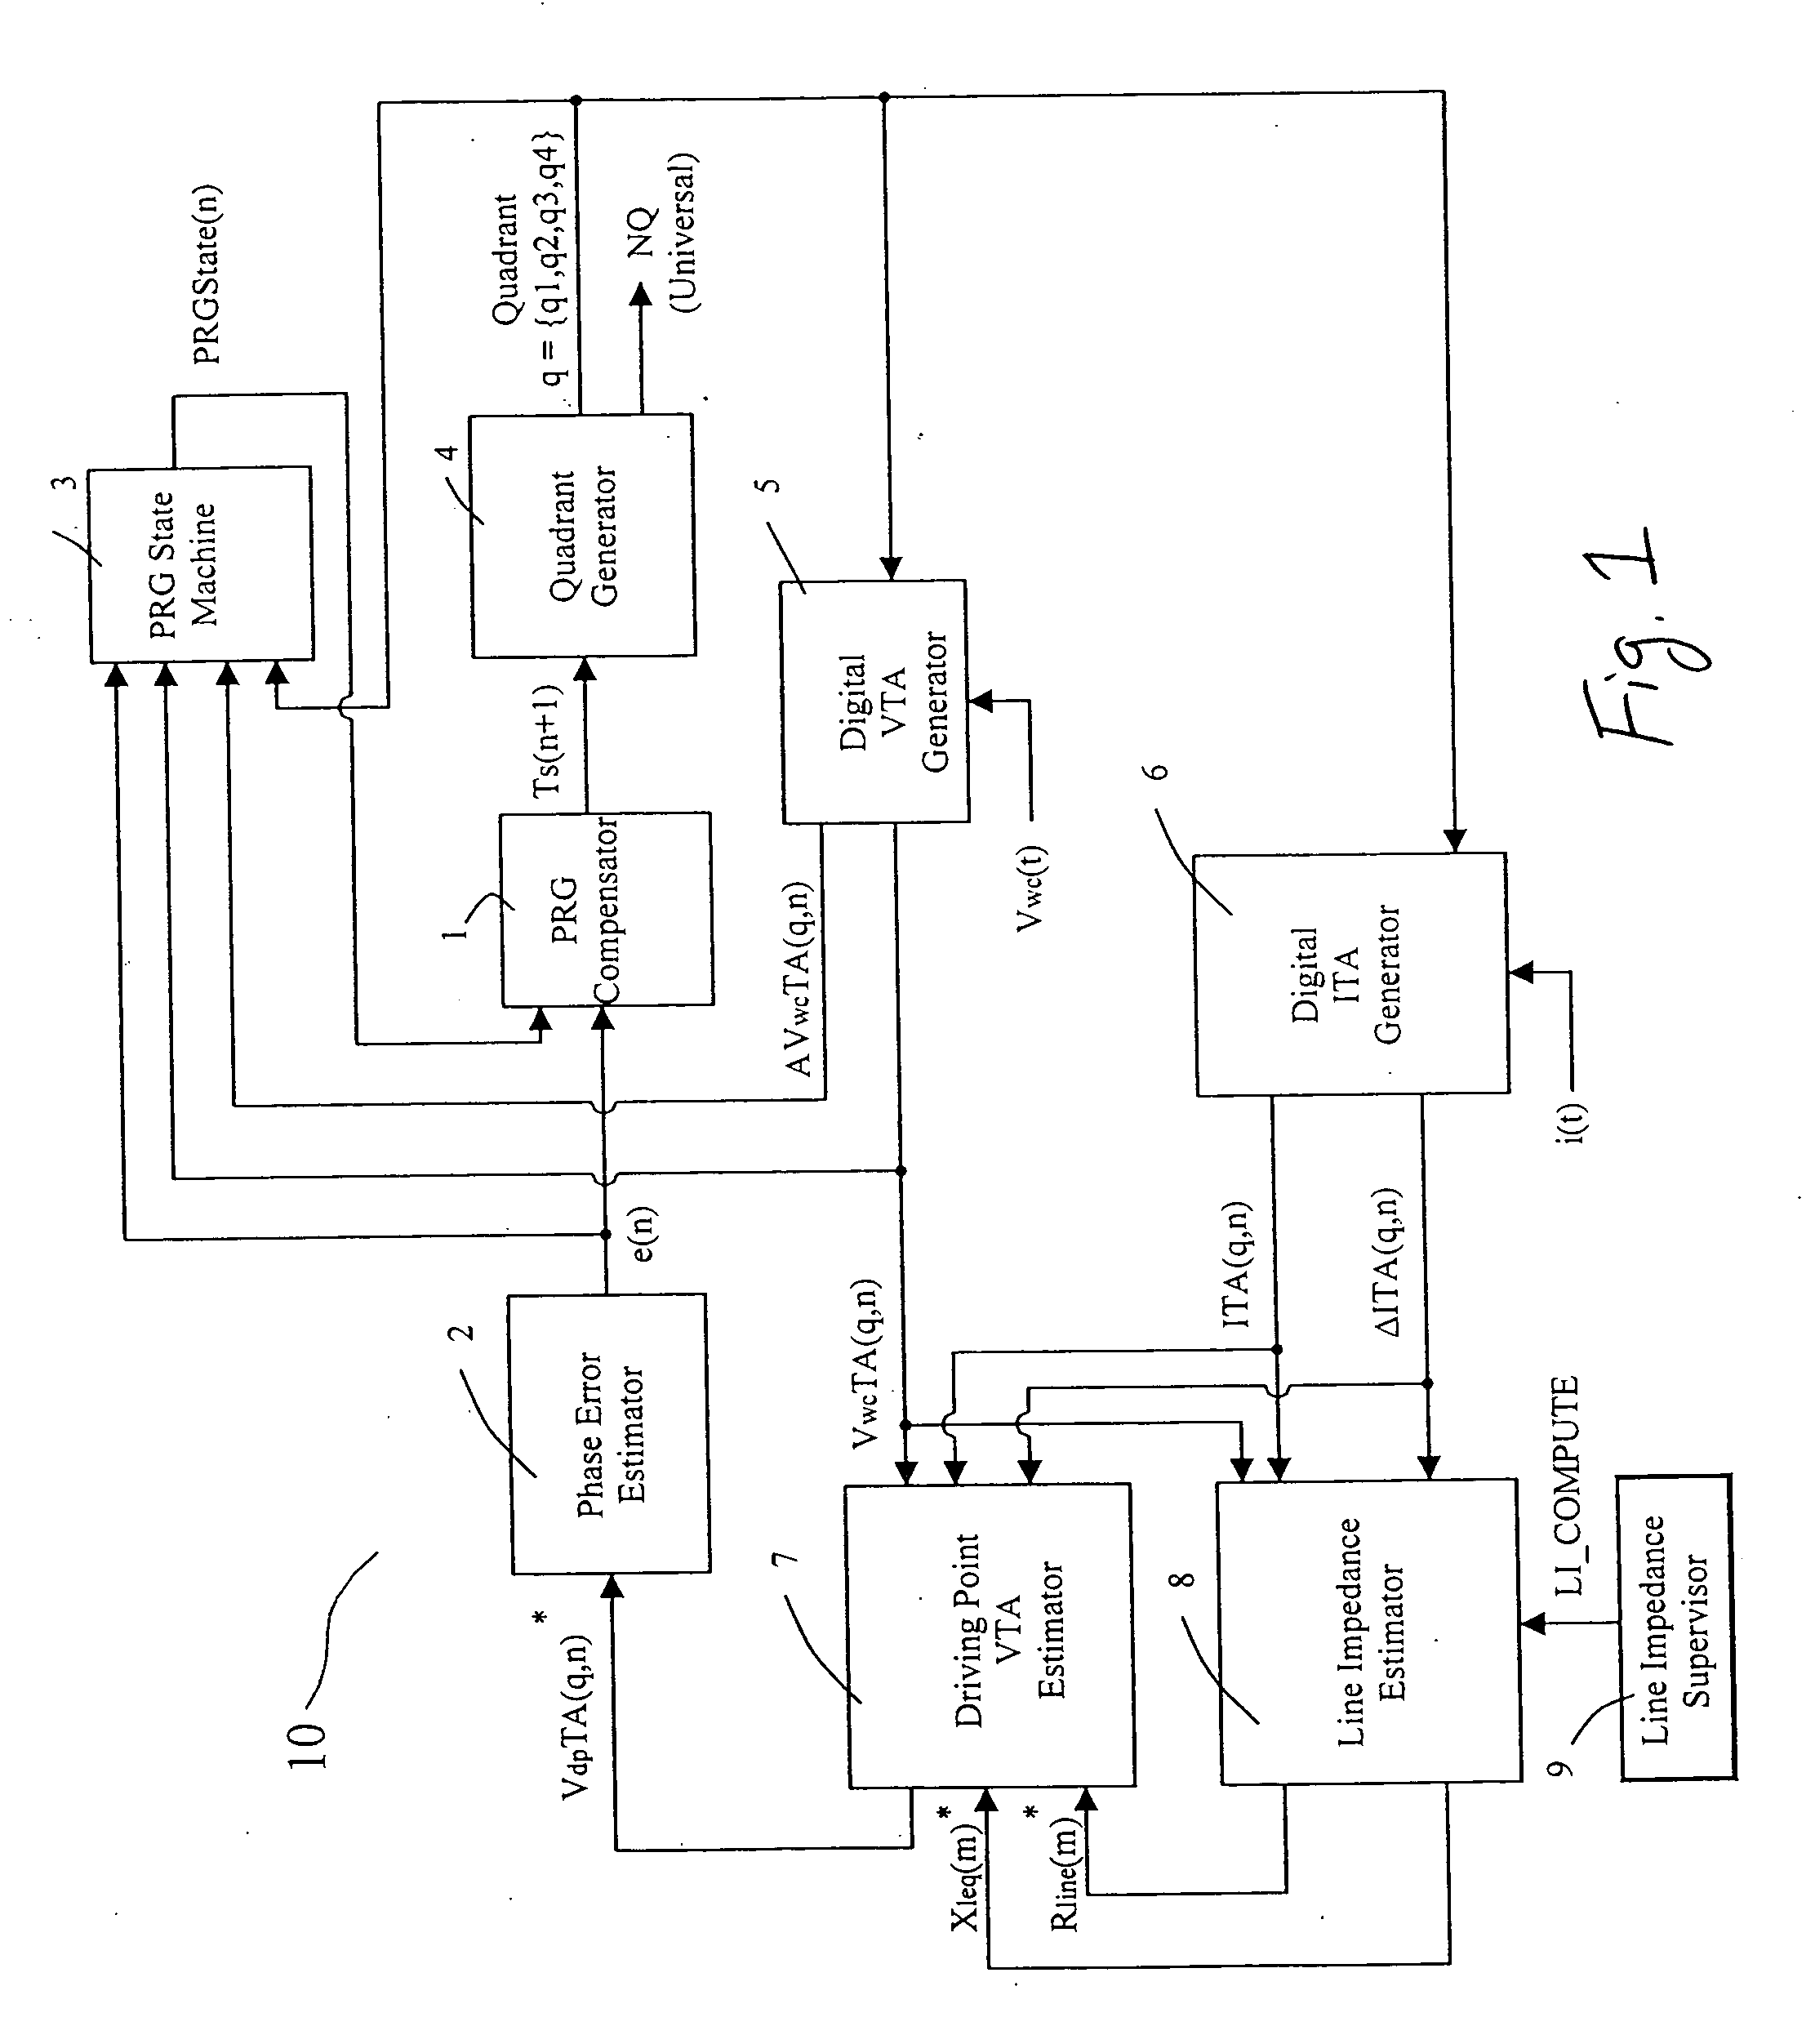 Phase reference generator with driving point voltage estimator